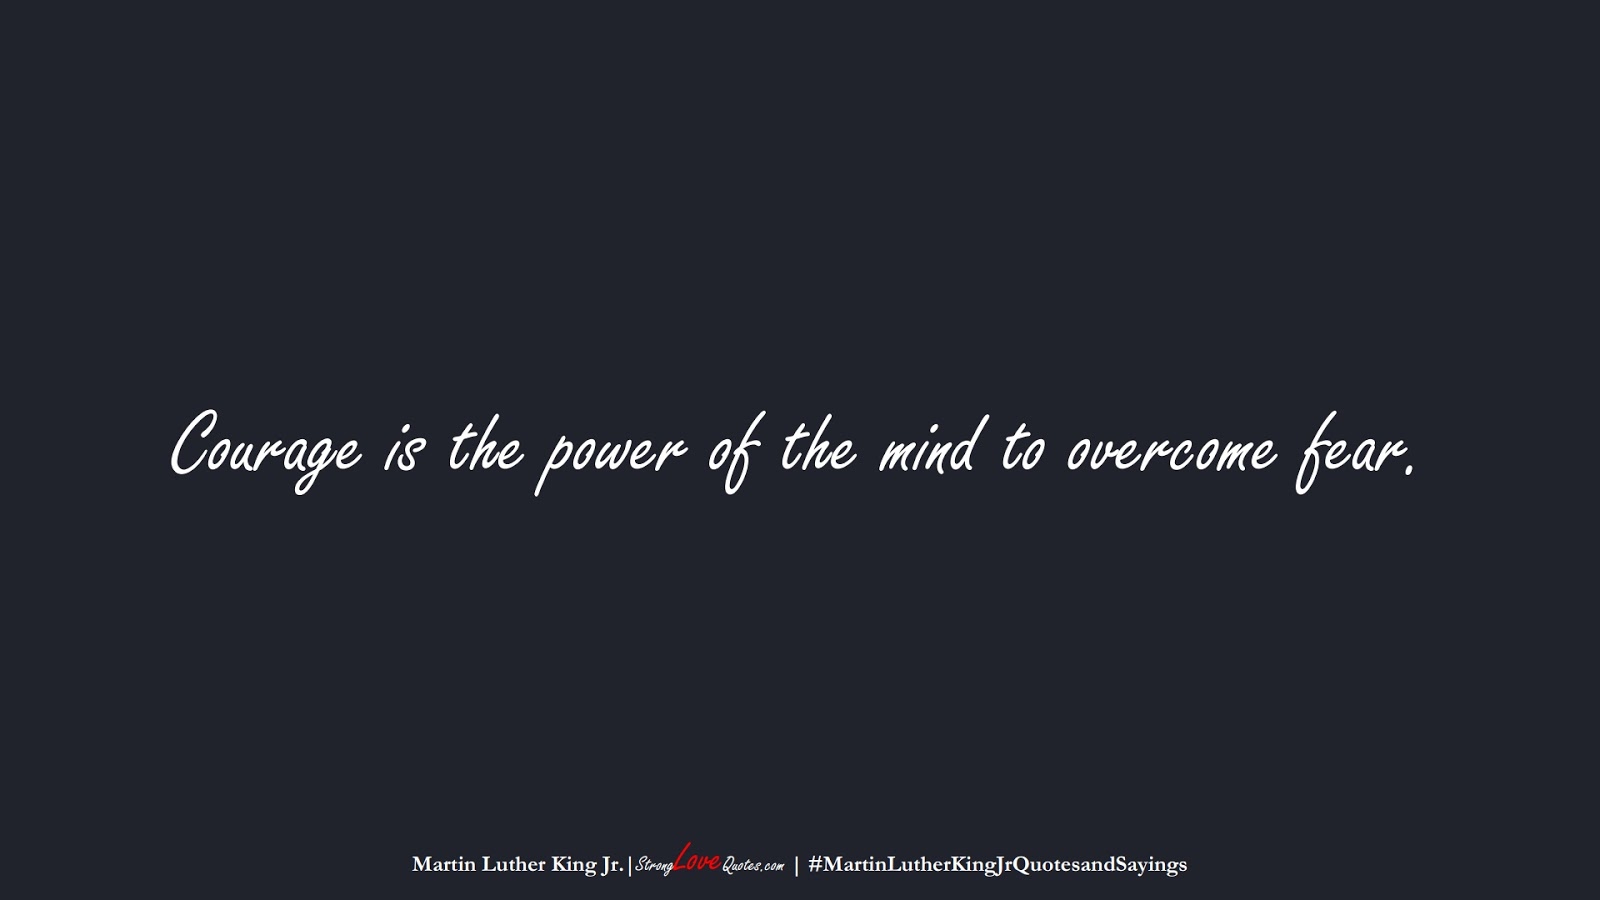 Courage is the power of the mind to overcome fear. (Martin Luther King Jr.);  #MartinLutherKingJrQuotesandSayings